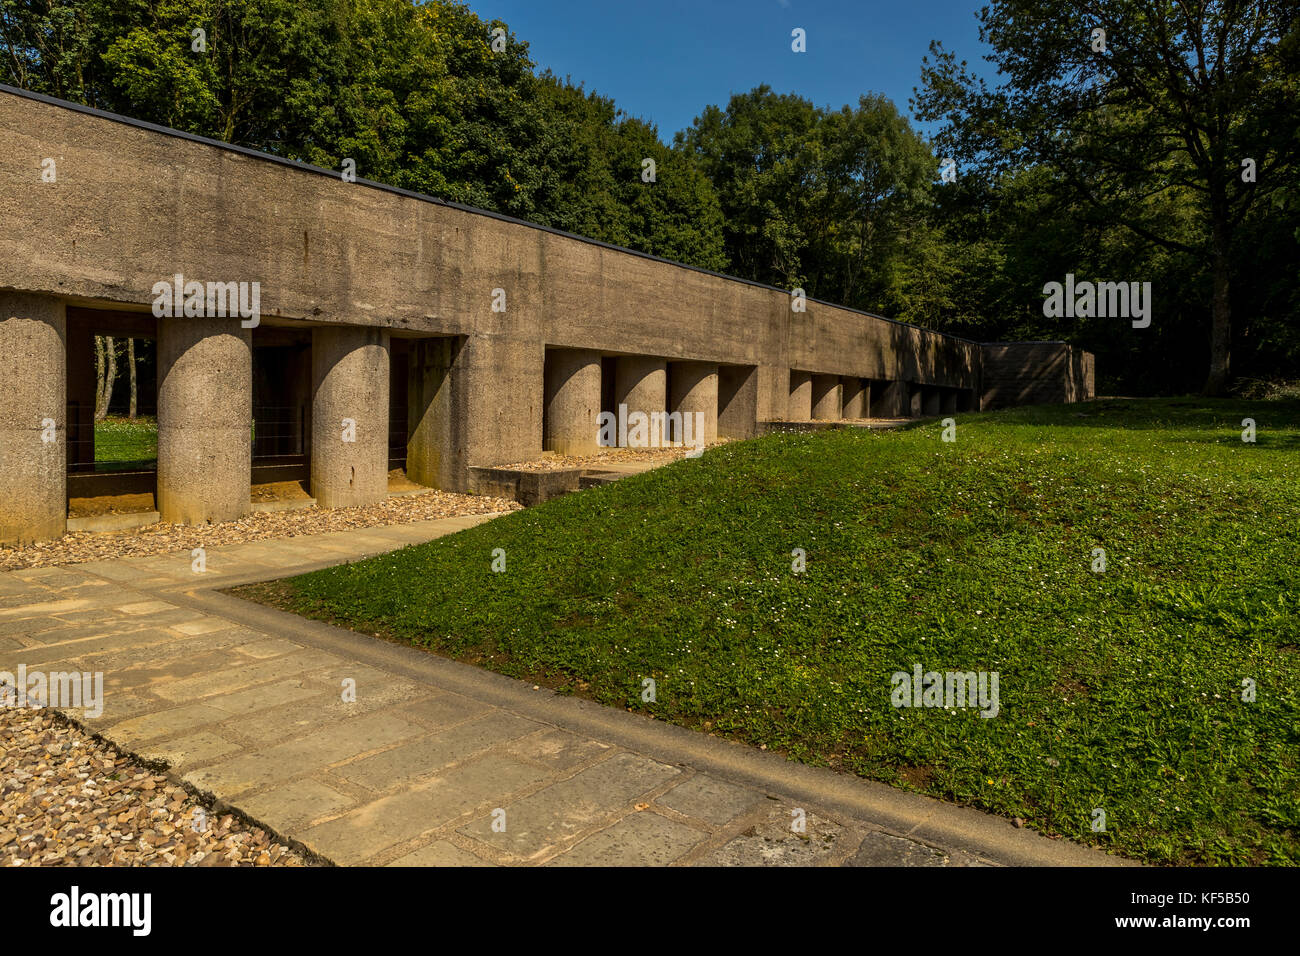 The Douaumont ossuary, national cemetery and memorial site, including Trench du Bayonet, France. Stock Photo